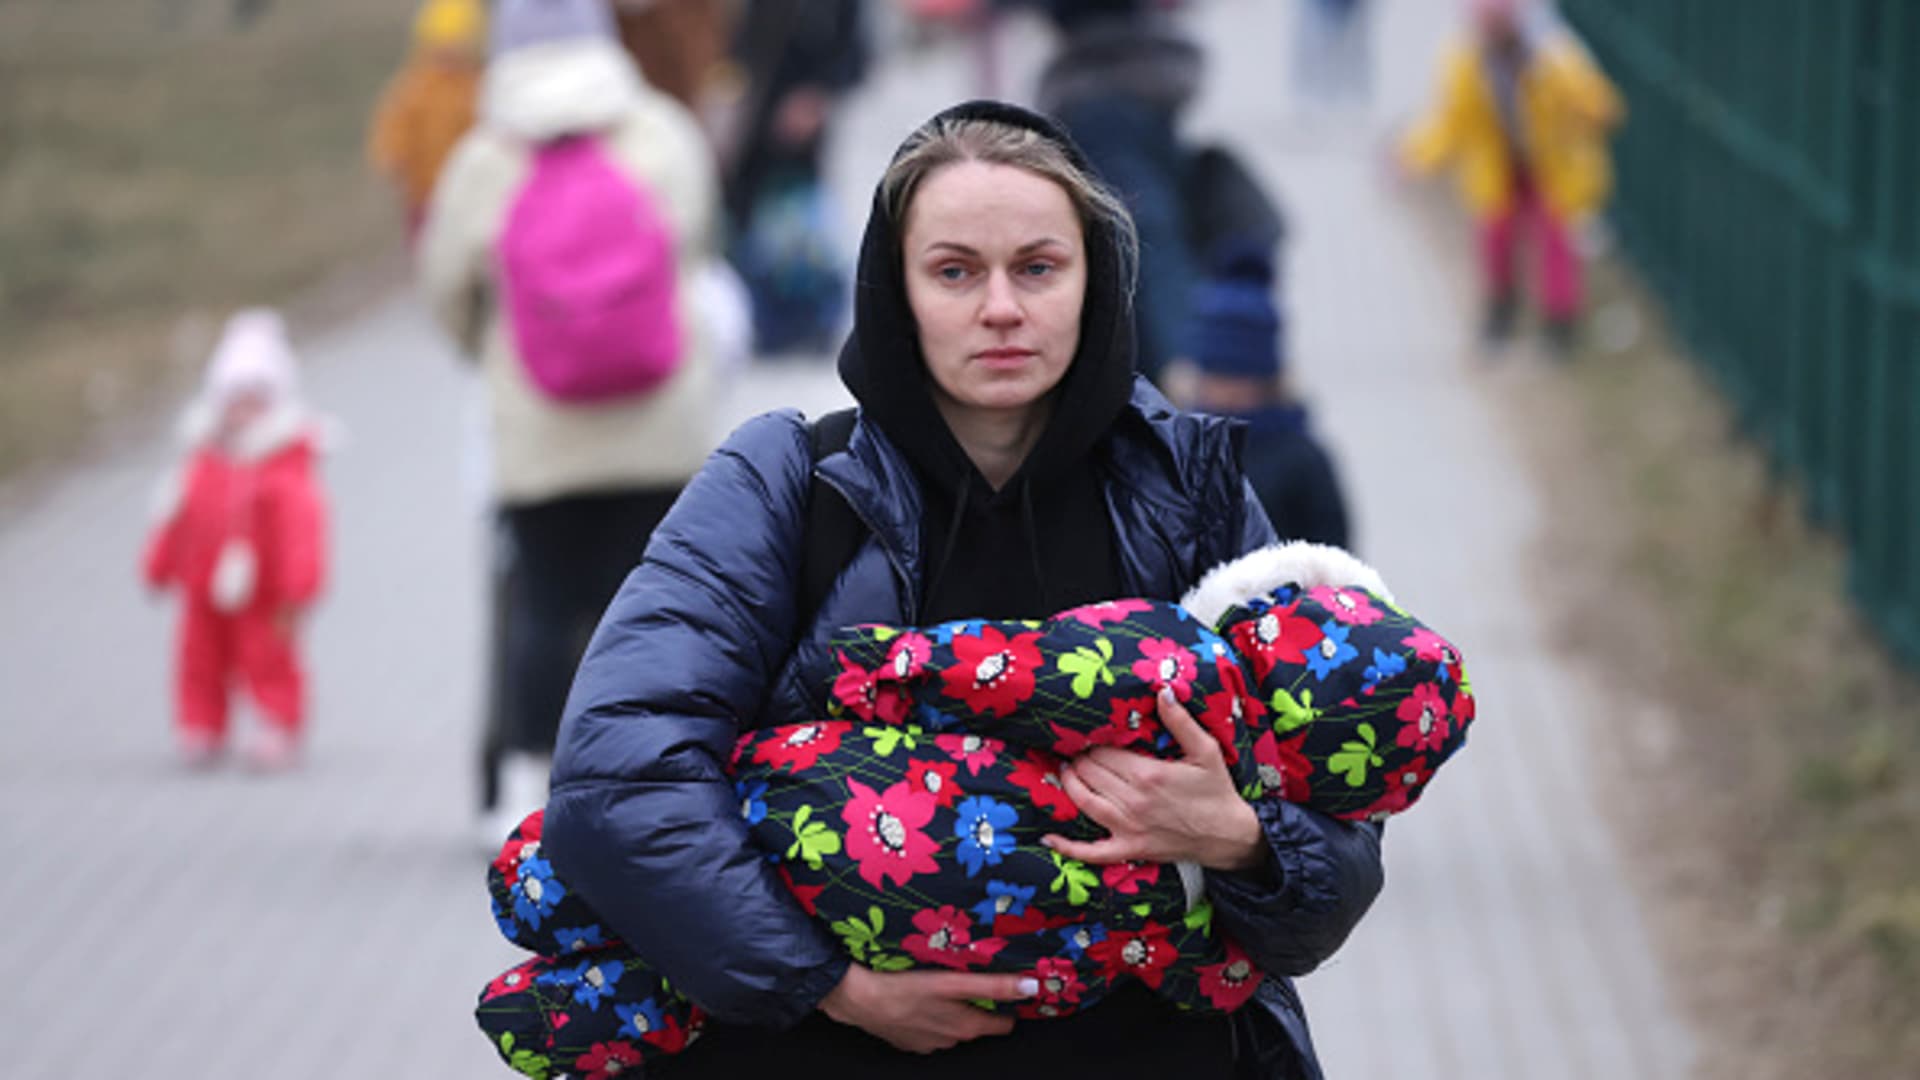 Women and children from war-torn Ukraine, including a mother carrying an infant, arrive in Poland at the Medyka border crossing on March 04, 2022.